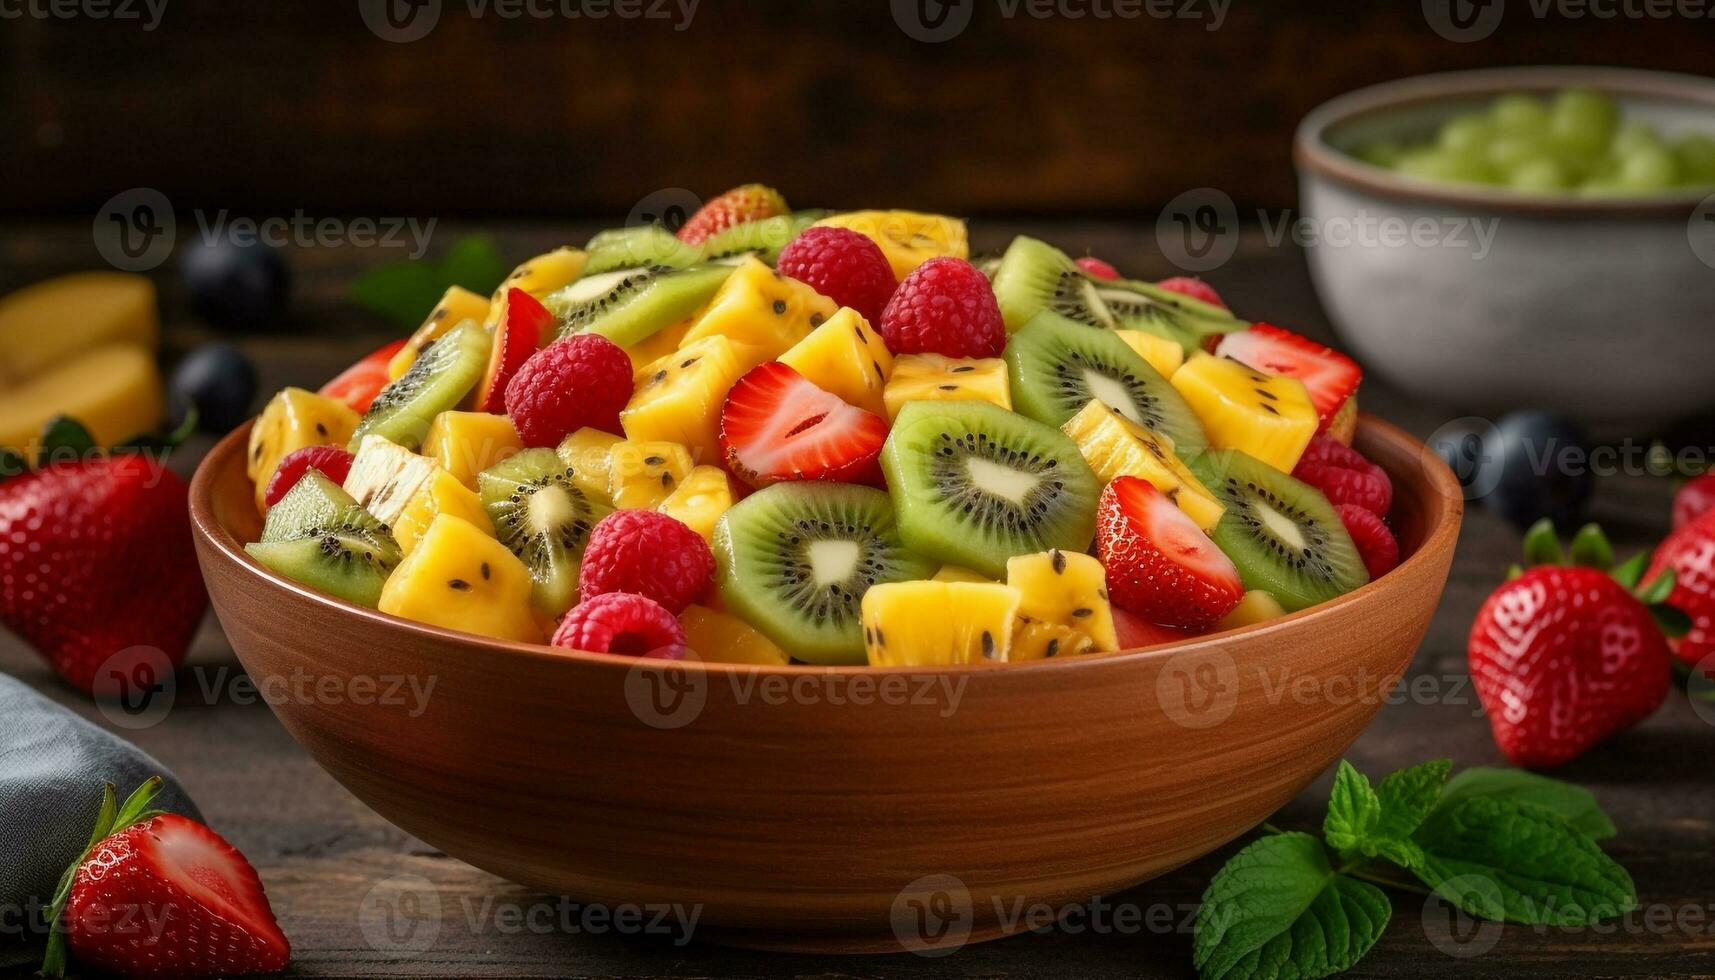 Freshness and nature in a bowl of gourmet strawberry dessert generated by AI photo